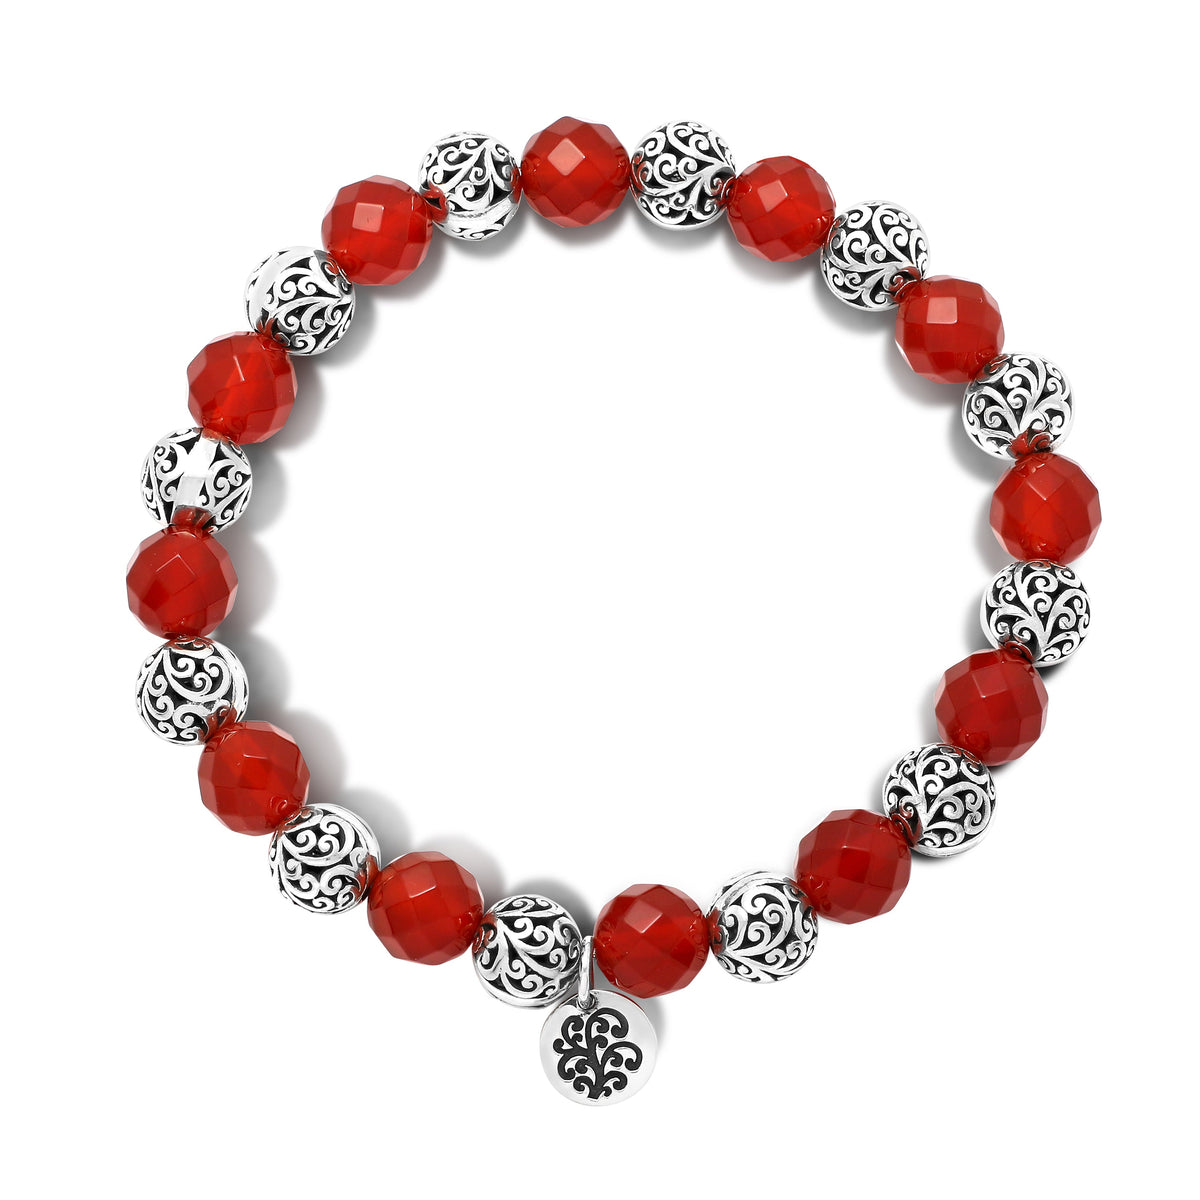 8 mm LH Signature Scroll Beads and Red Carnelian Alternated Stretch Bracelet